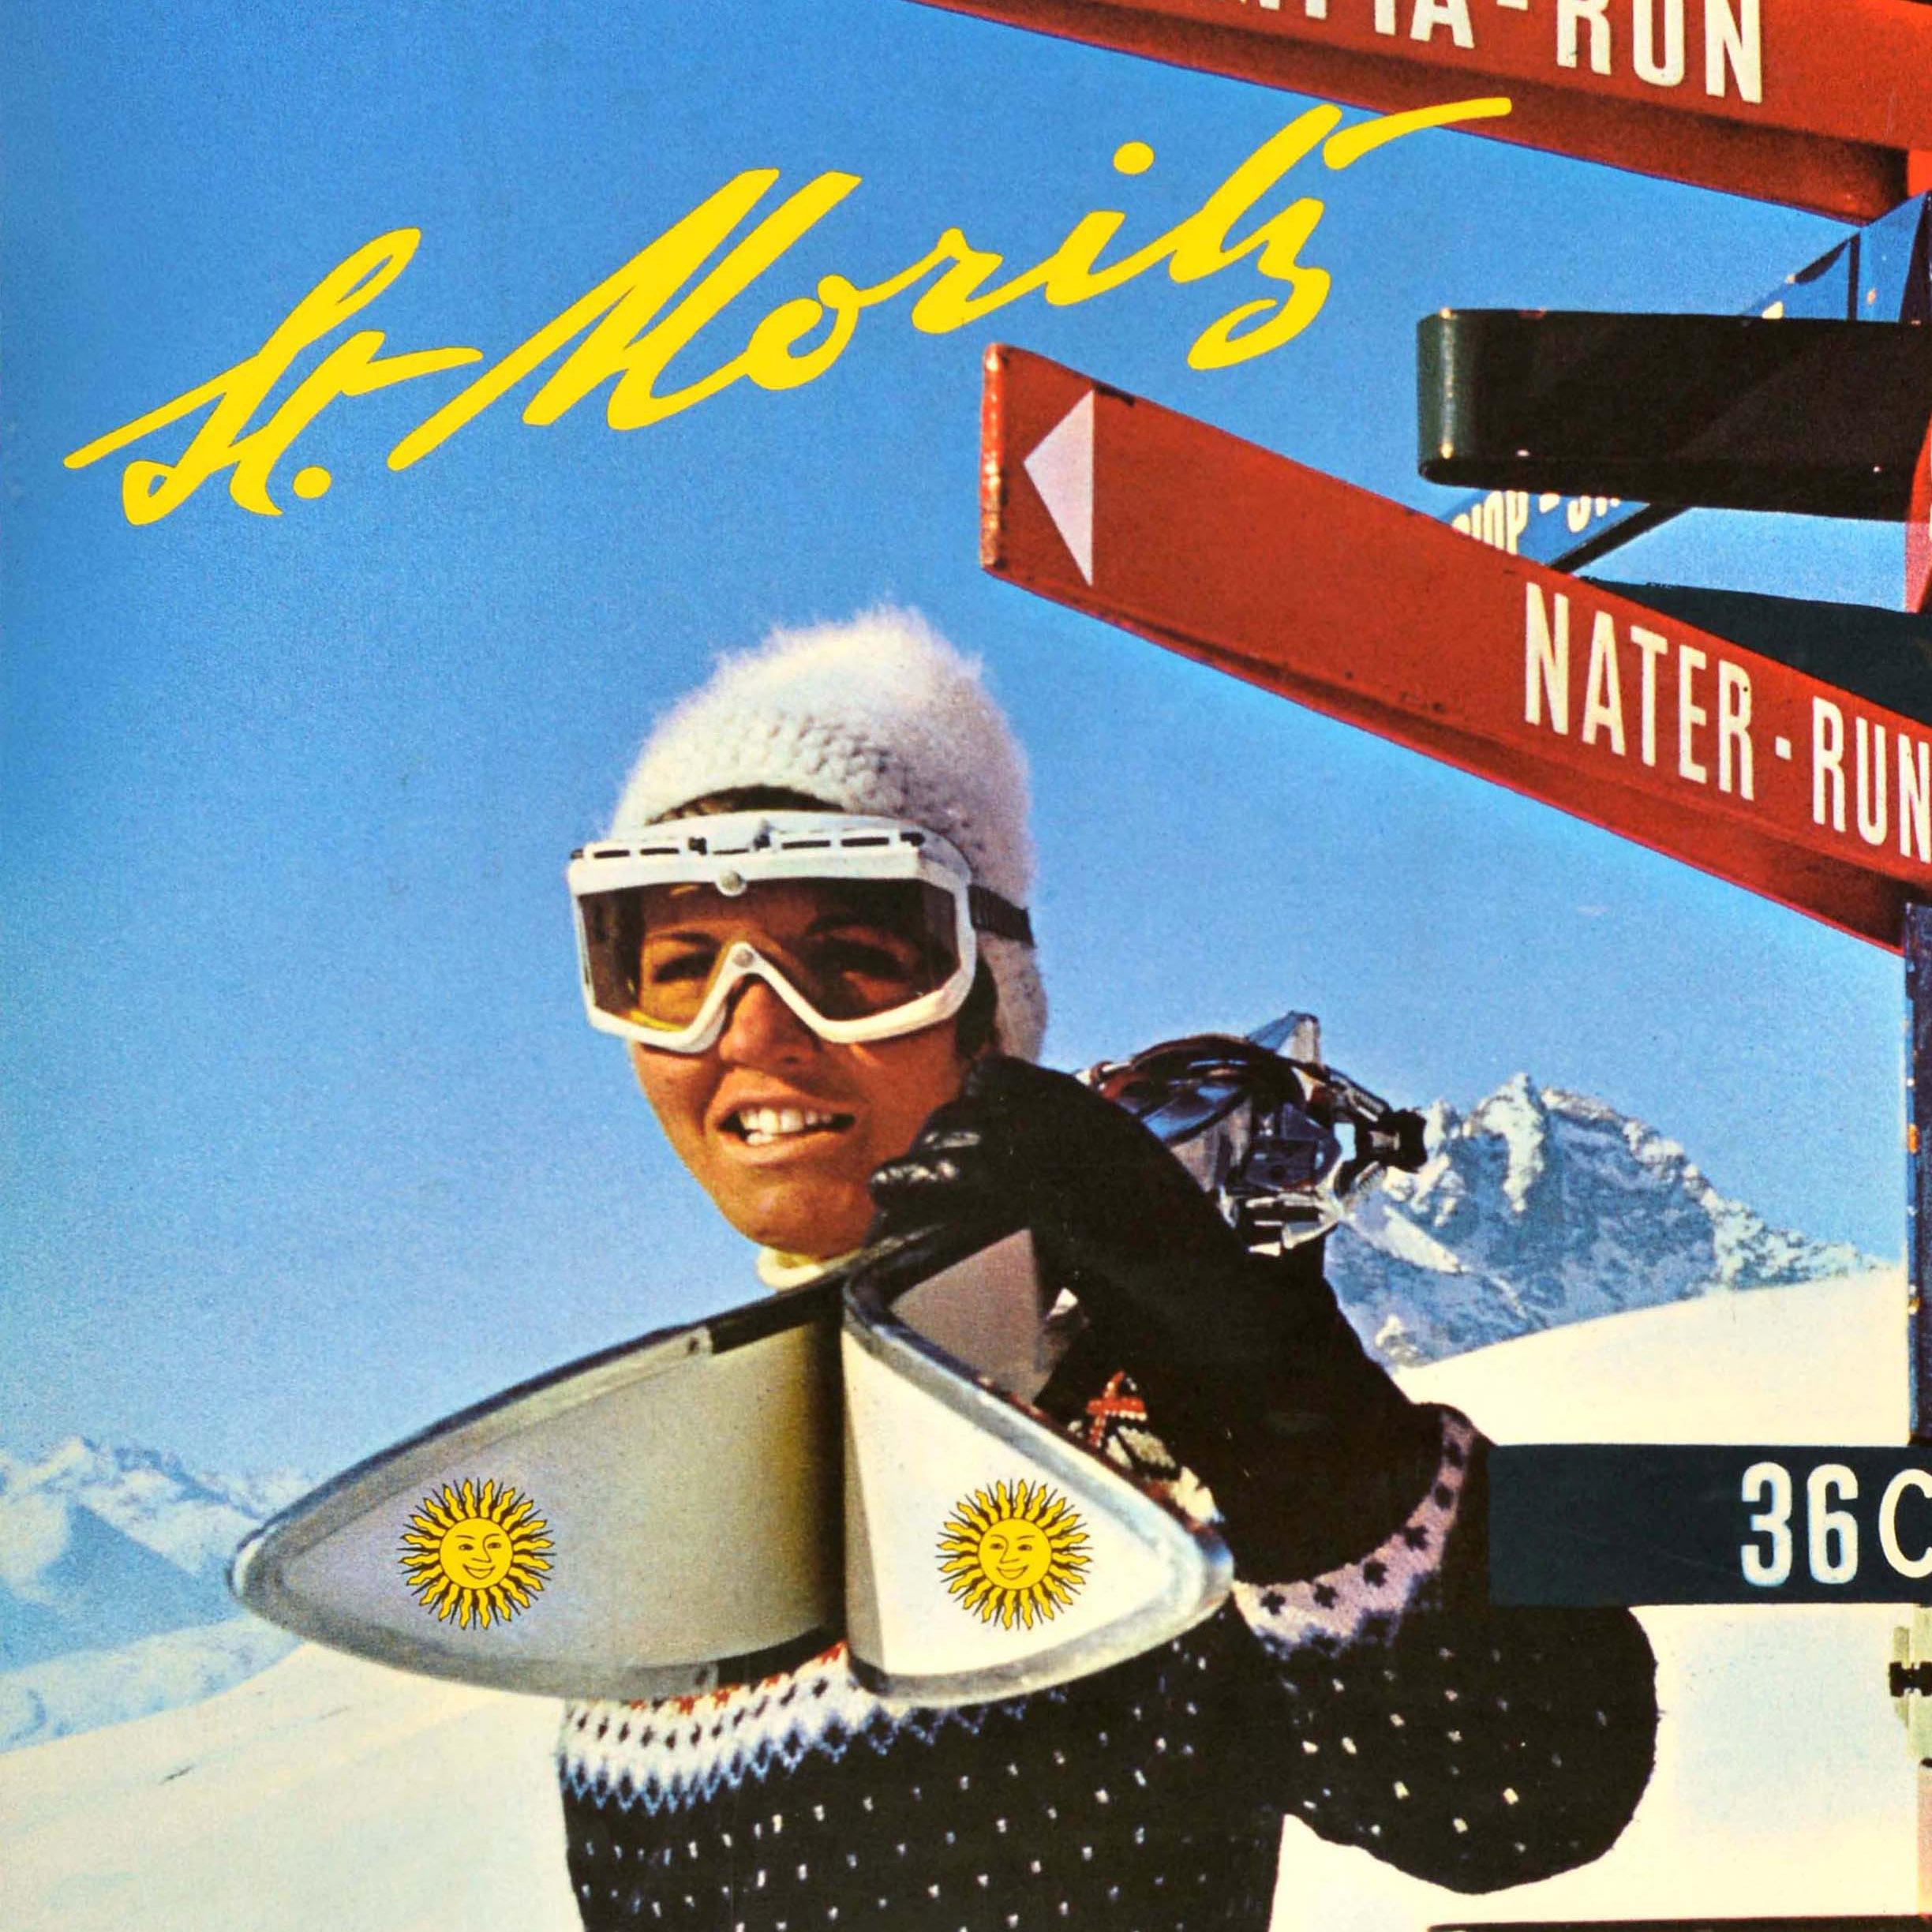 Original vintage skiing poster for the alpine resort of St Moritz in Switzerland featuring a skier wearing ski goggles, a bobble hat and knitted jumper, and holding poles and a pair of skis with the St Moritz sun logo on them, standing in front of a